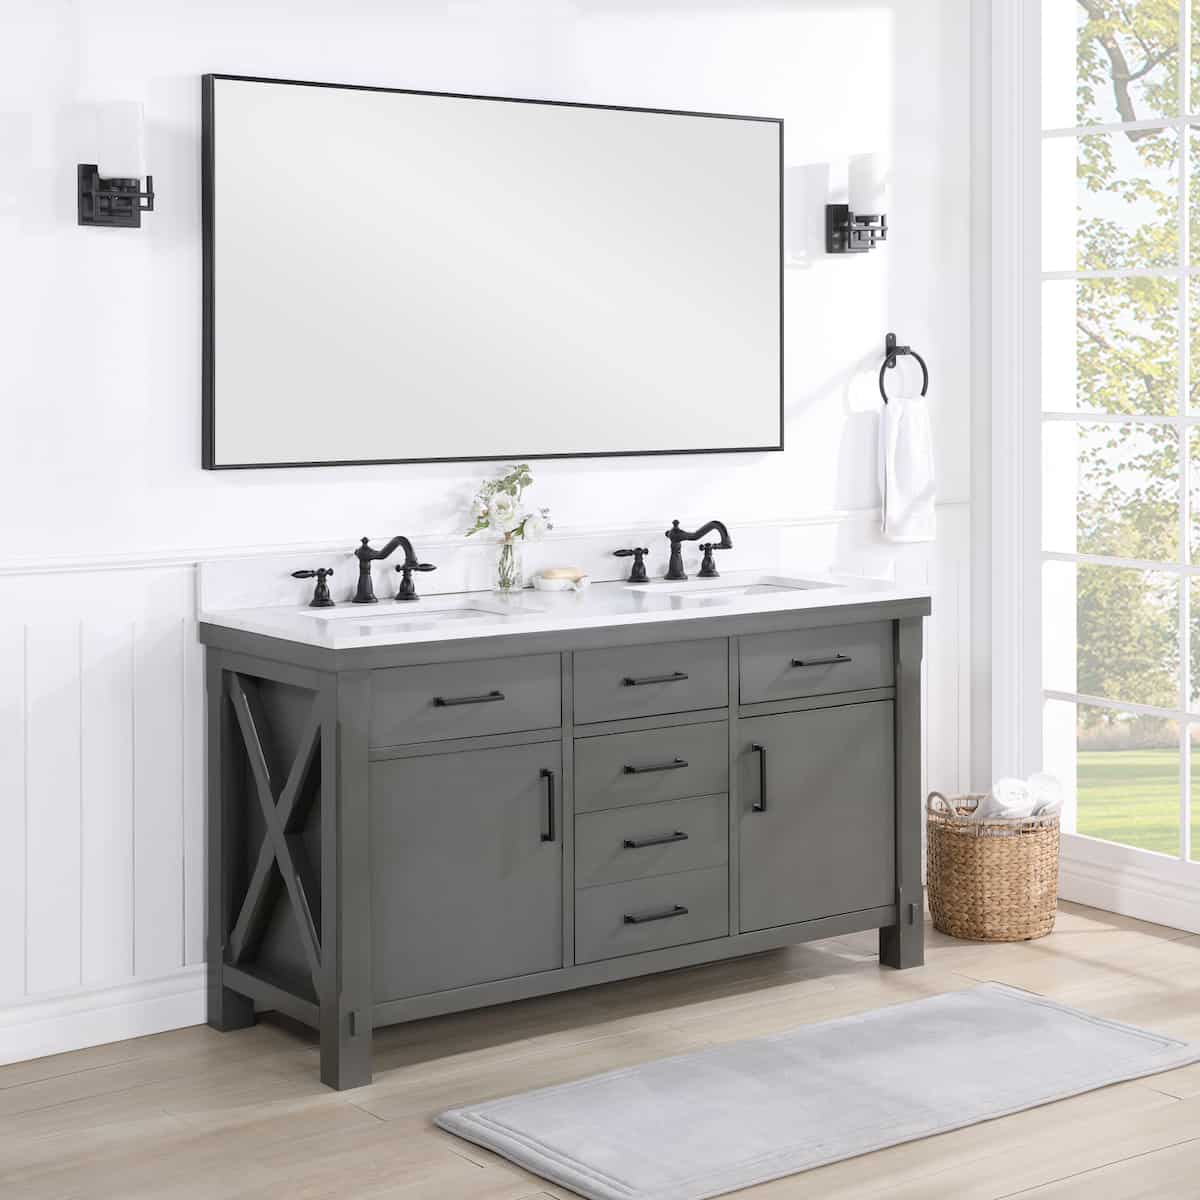 Vinnova Viella 60 Inch Freestanding Double Sink Bath Vanity in Rust Grey Finish with White Composite Countertop With Mirror Side 701860-RU-WS